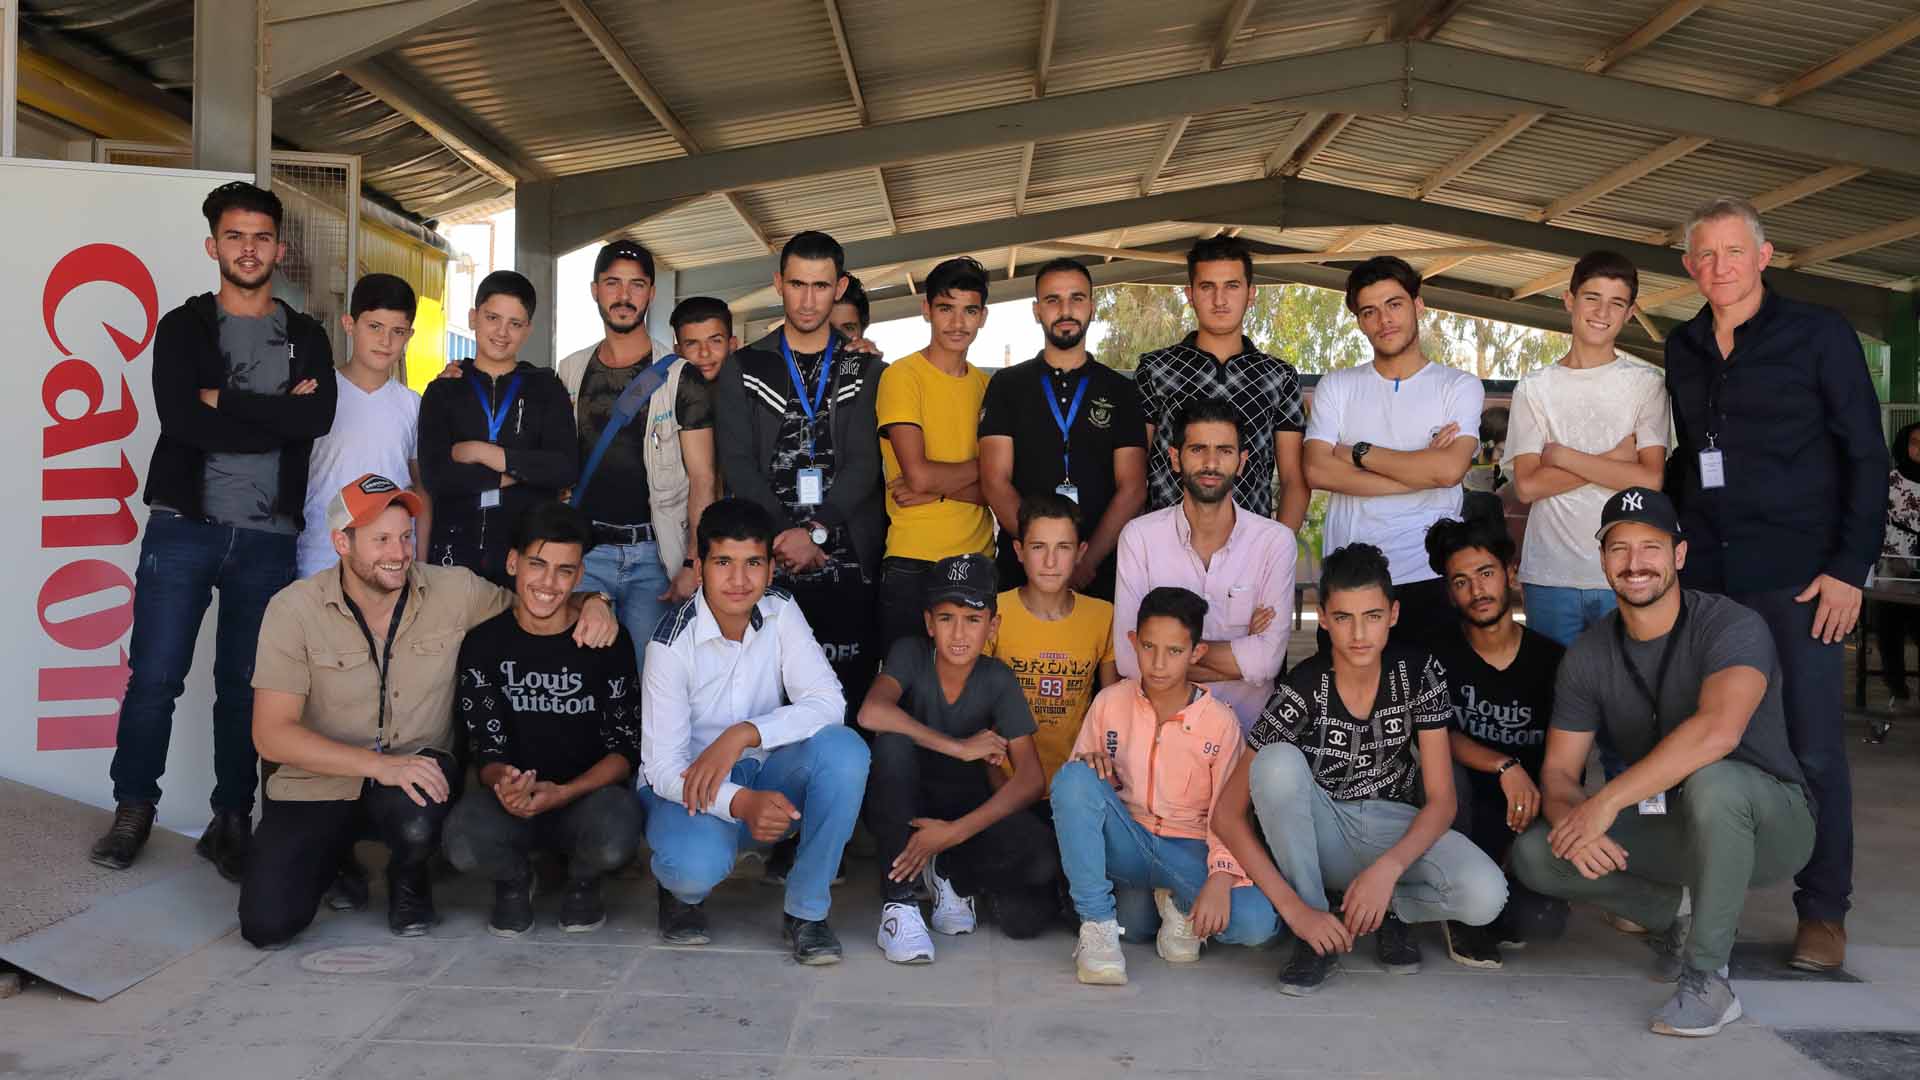 Canon inspires, educates and empowers local youth with 6 months of workshops in Za’atari refugee camp as part of its “Young People Pogramme”, in partnership with Lens on Life